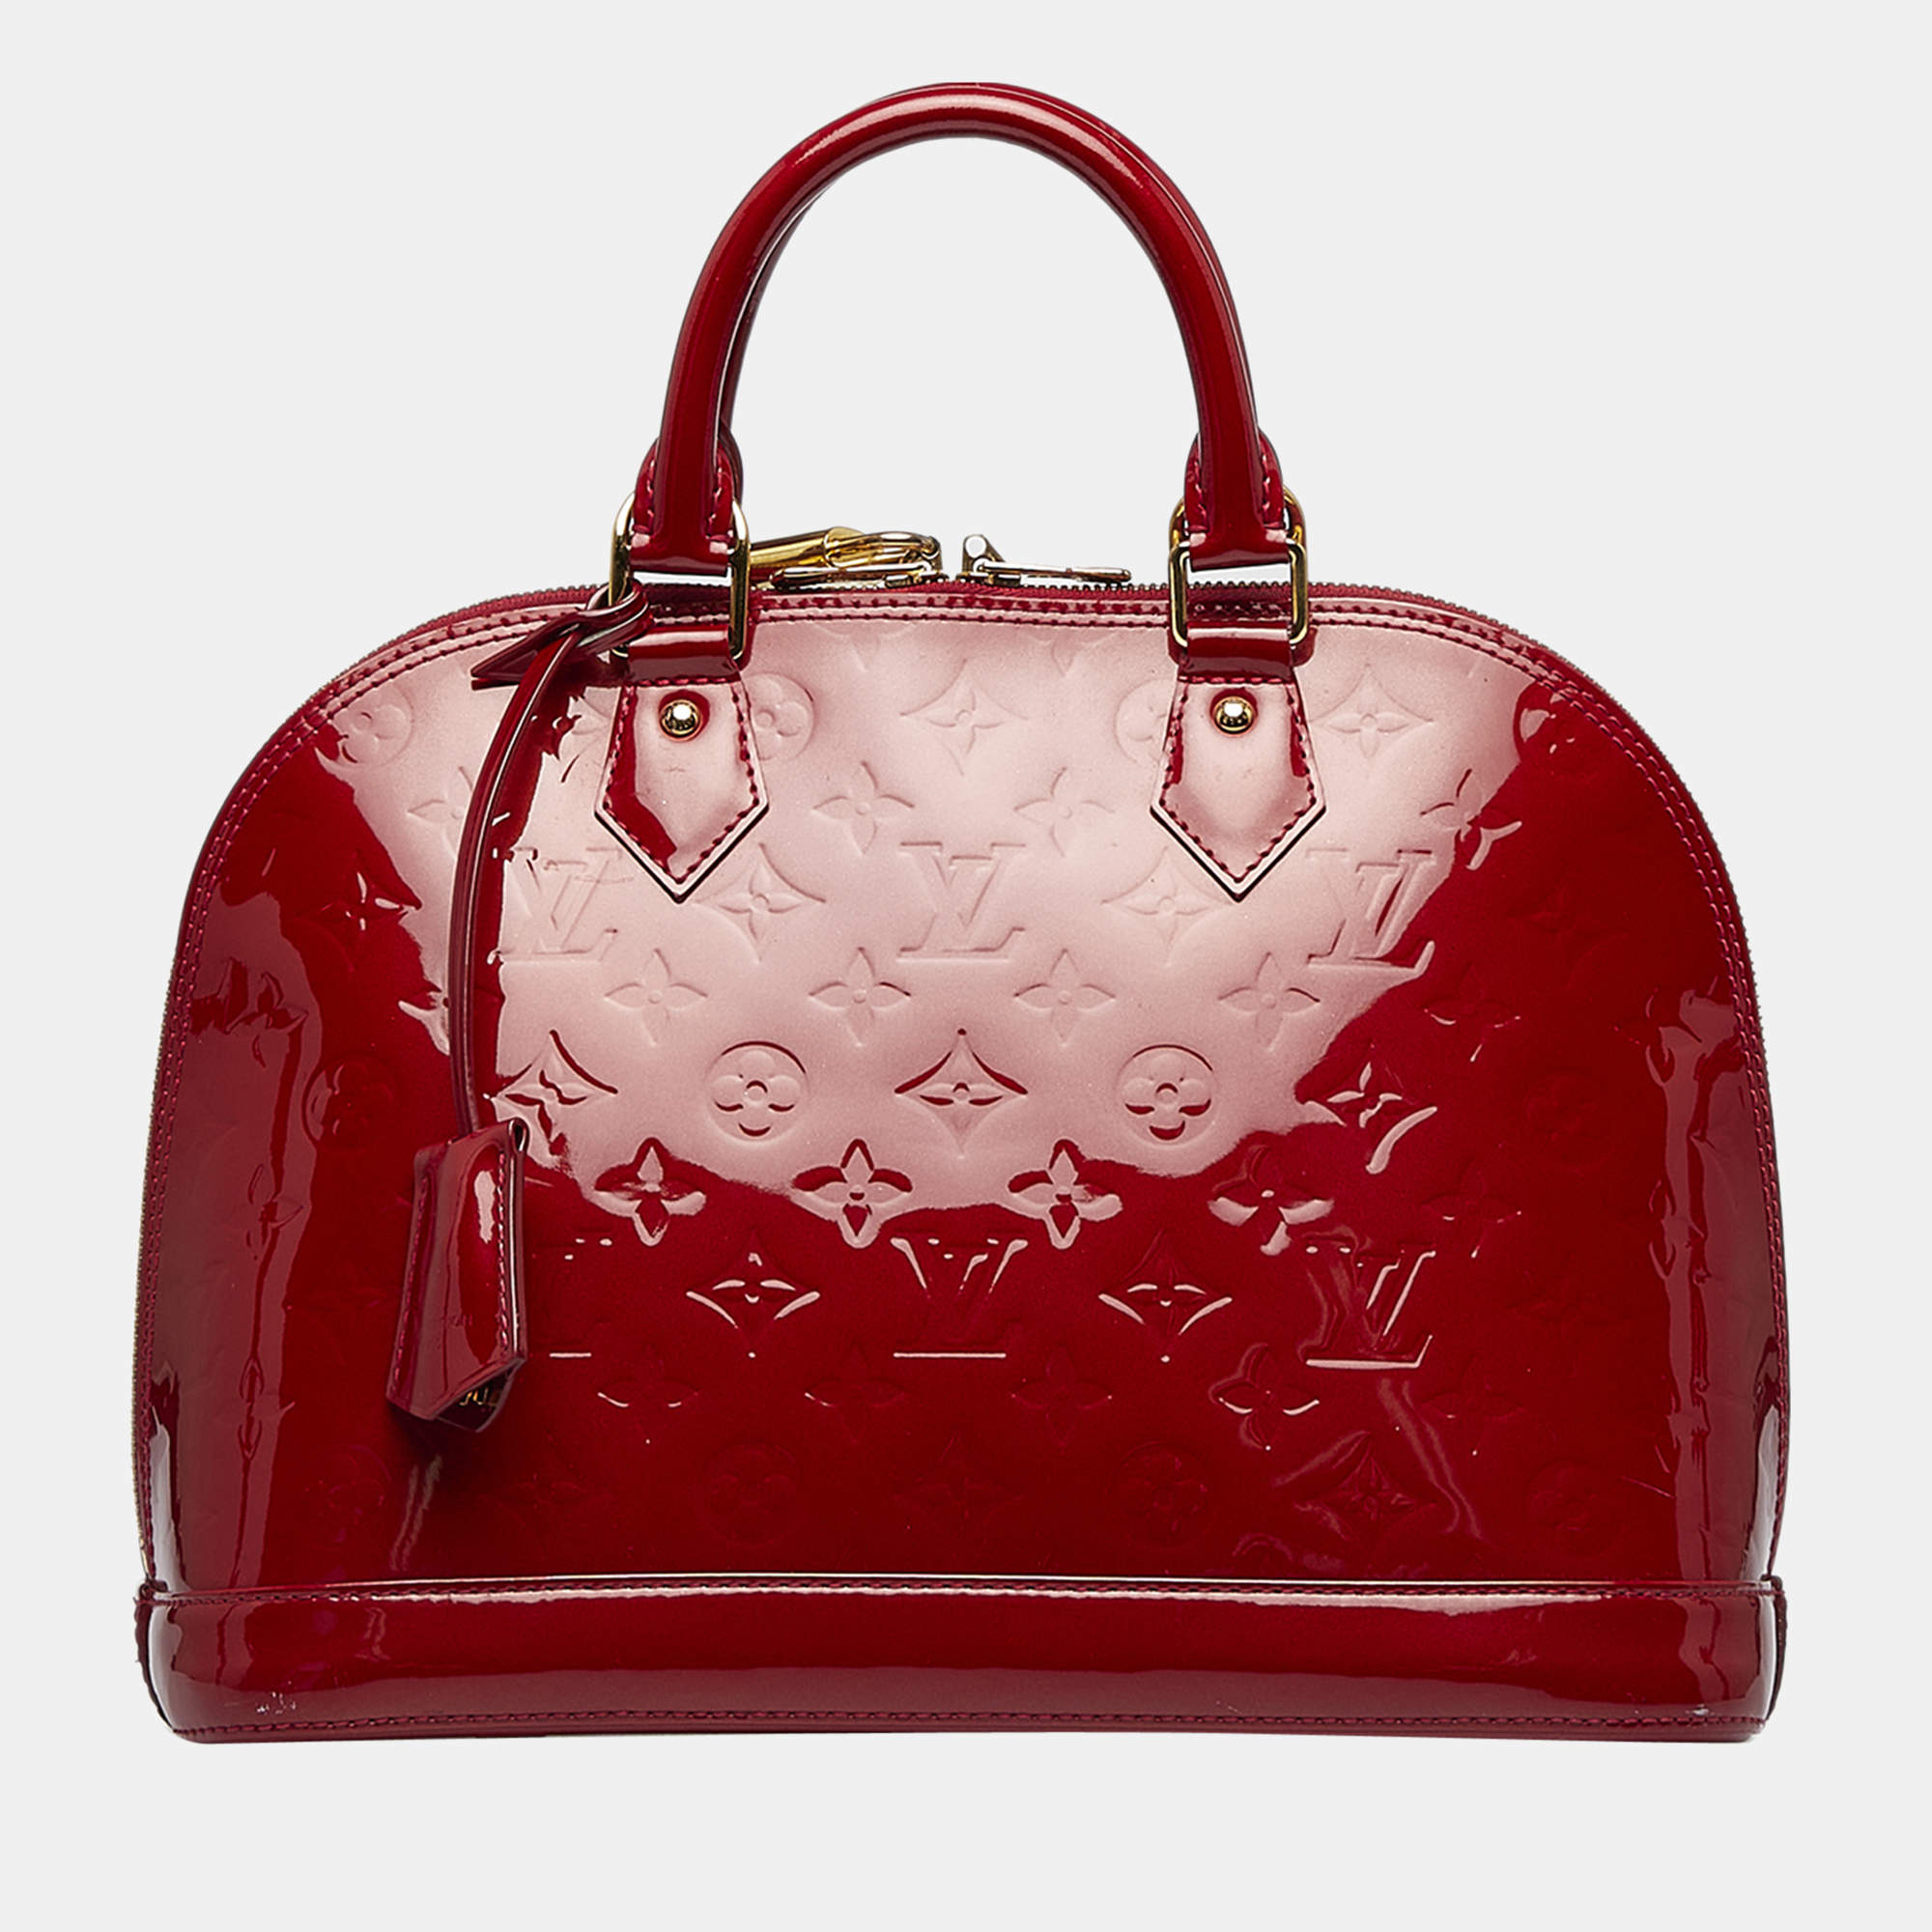 LV Bag - Colourful Pink And Red